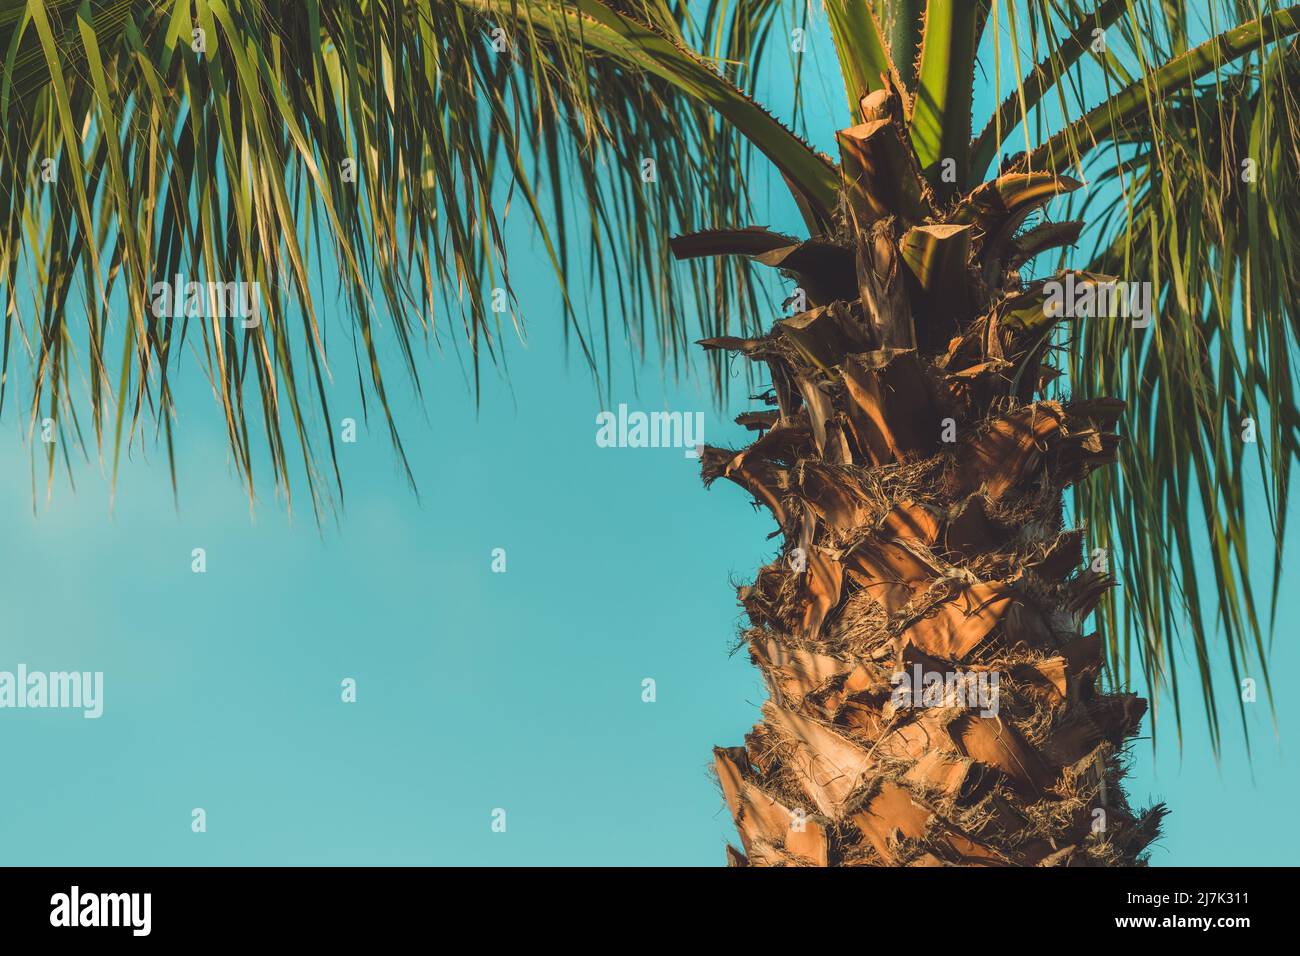 Palm trees at tropical seaside landscape in summer, summertime vacation and holiday background Stock Photo